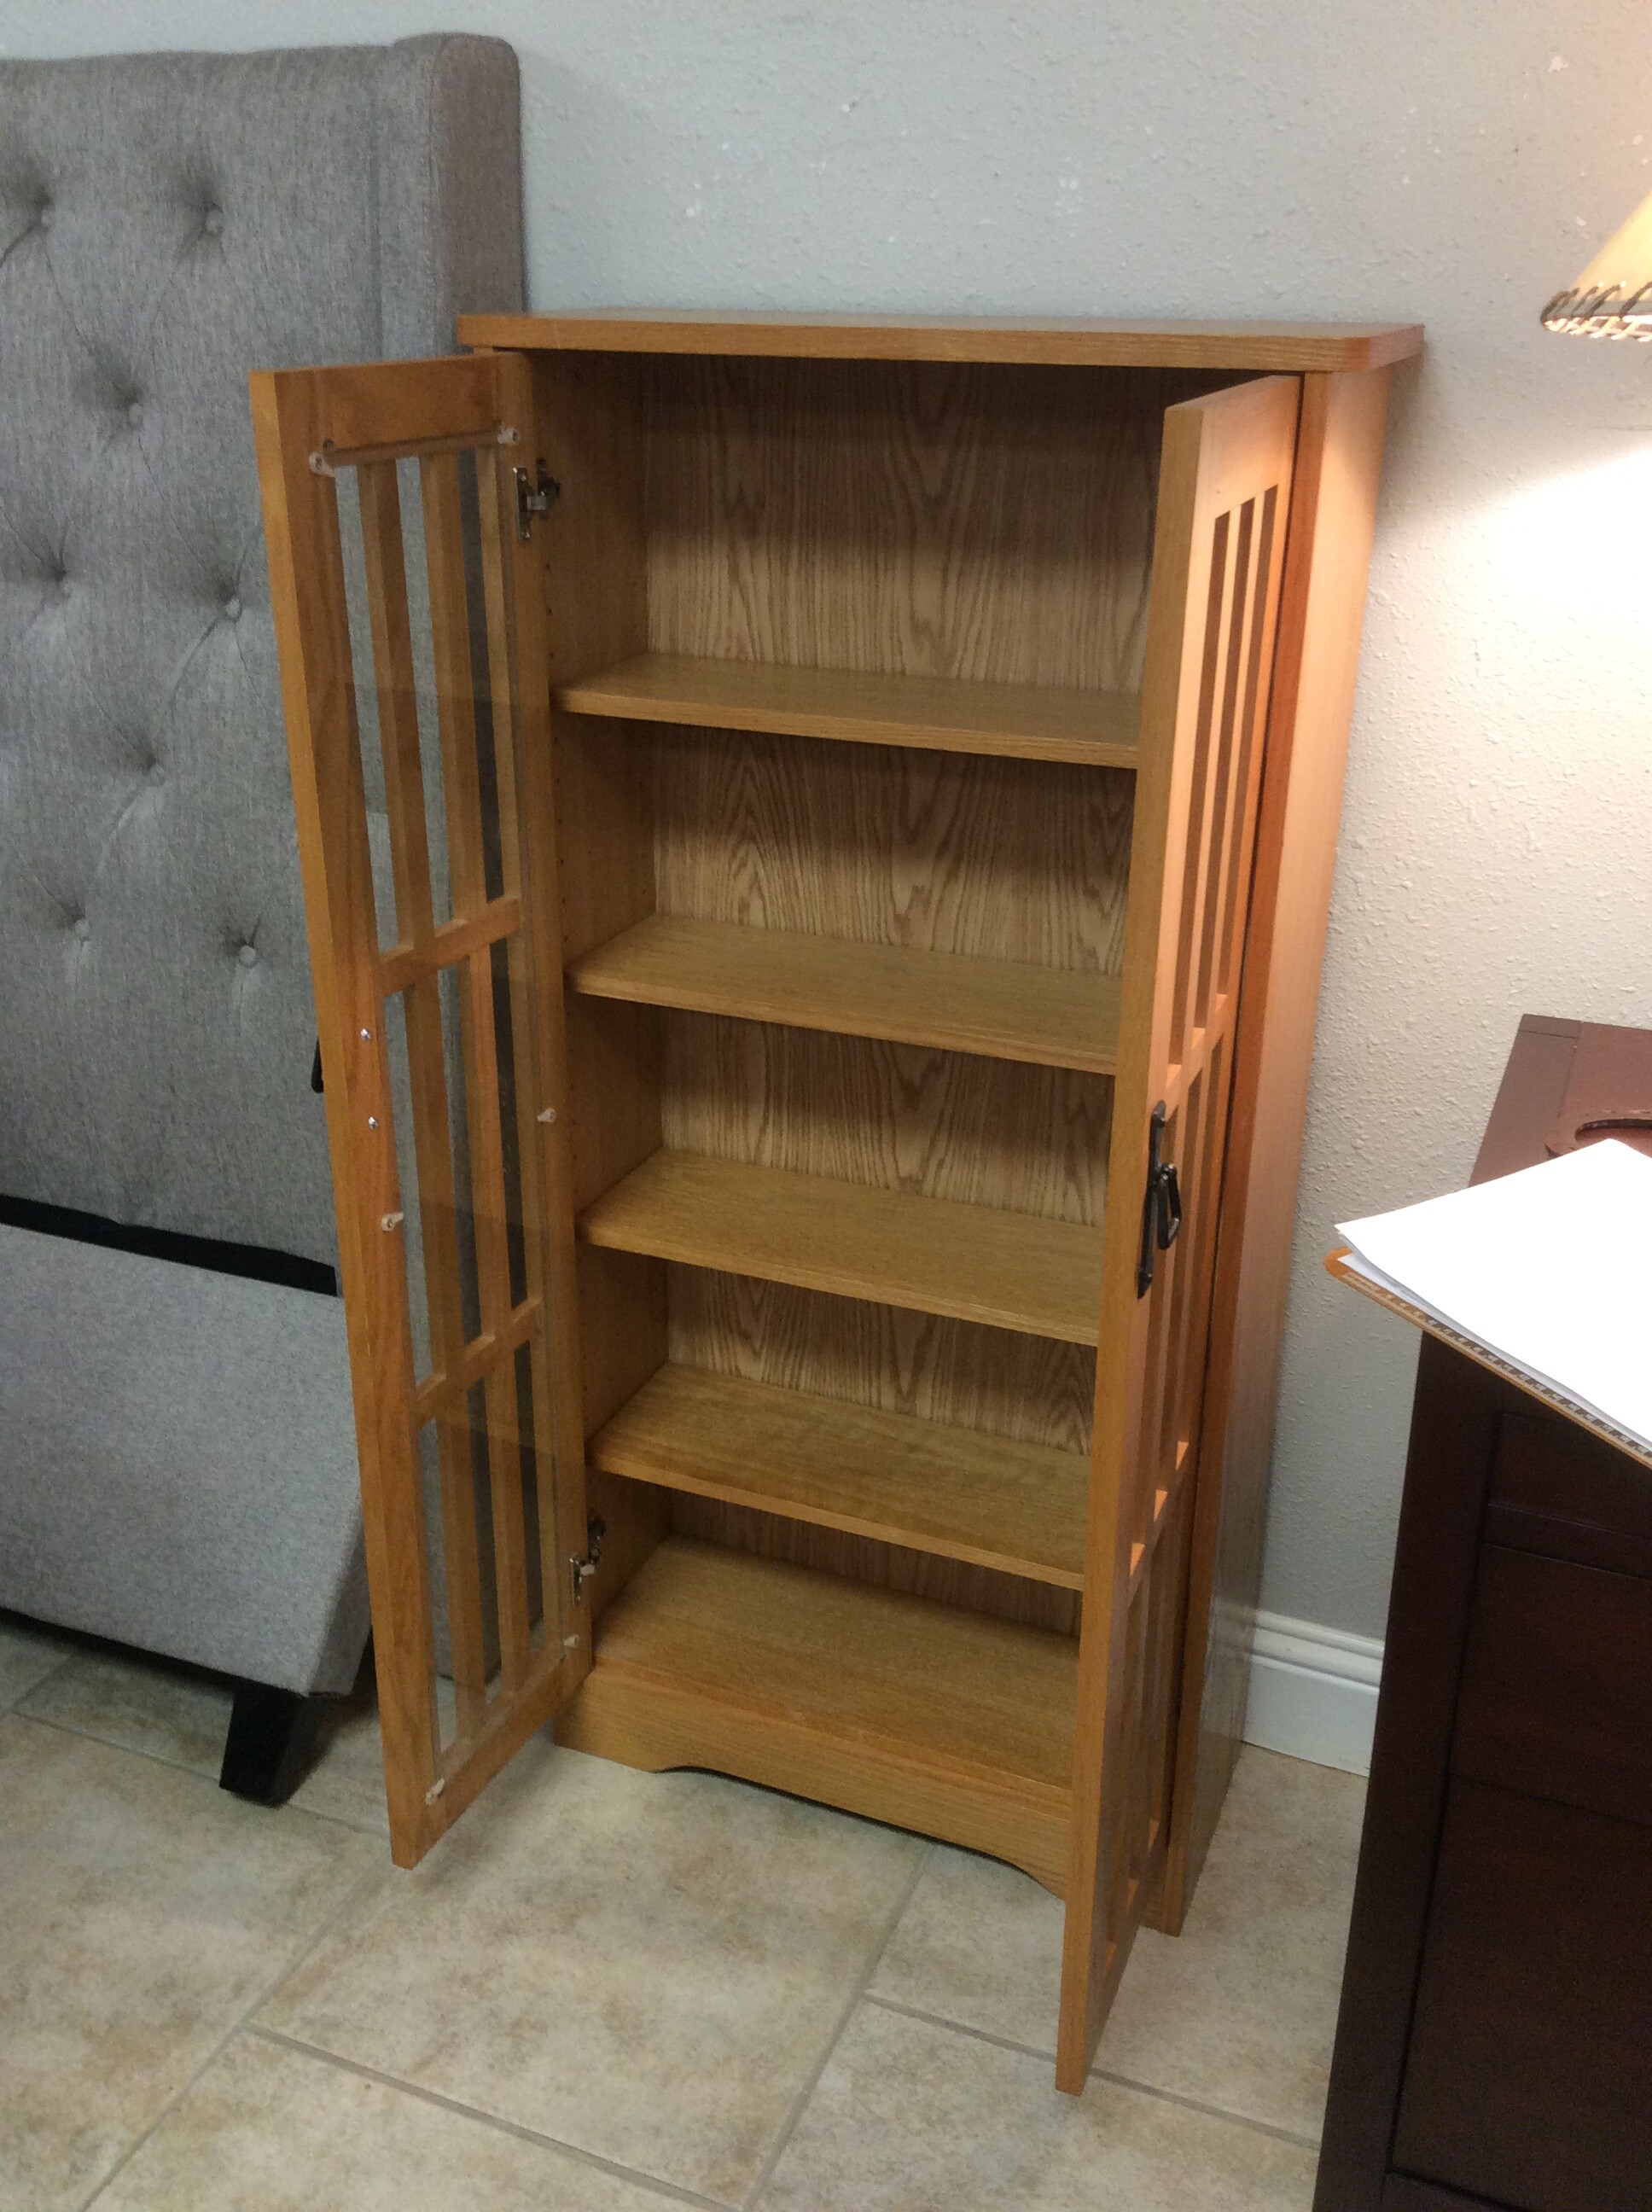 This is a beautiful Blonde Wood Stain Cabinet. This Cabinet has 5 adjustable shelfs and 2 glass doors.